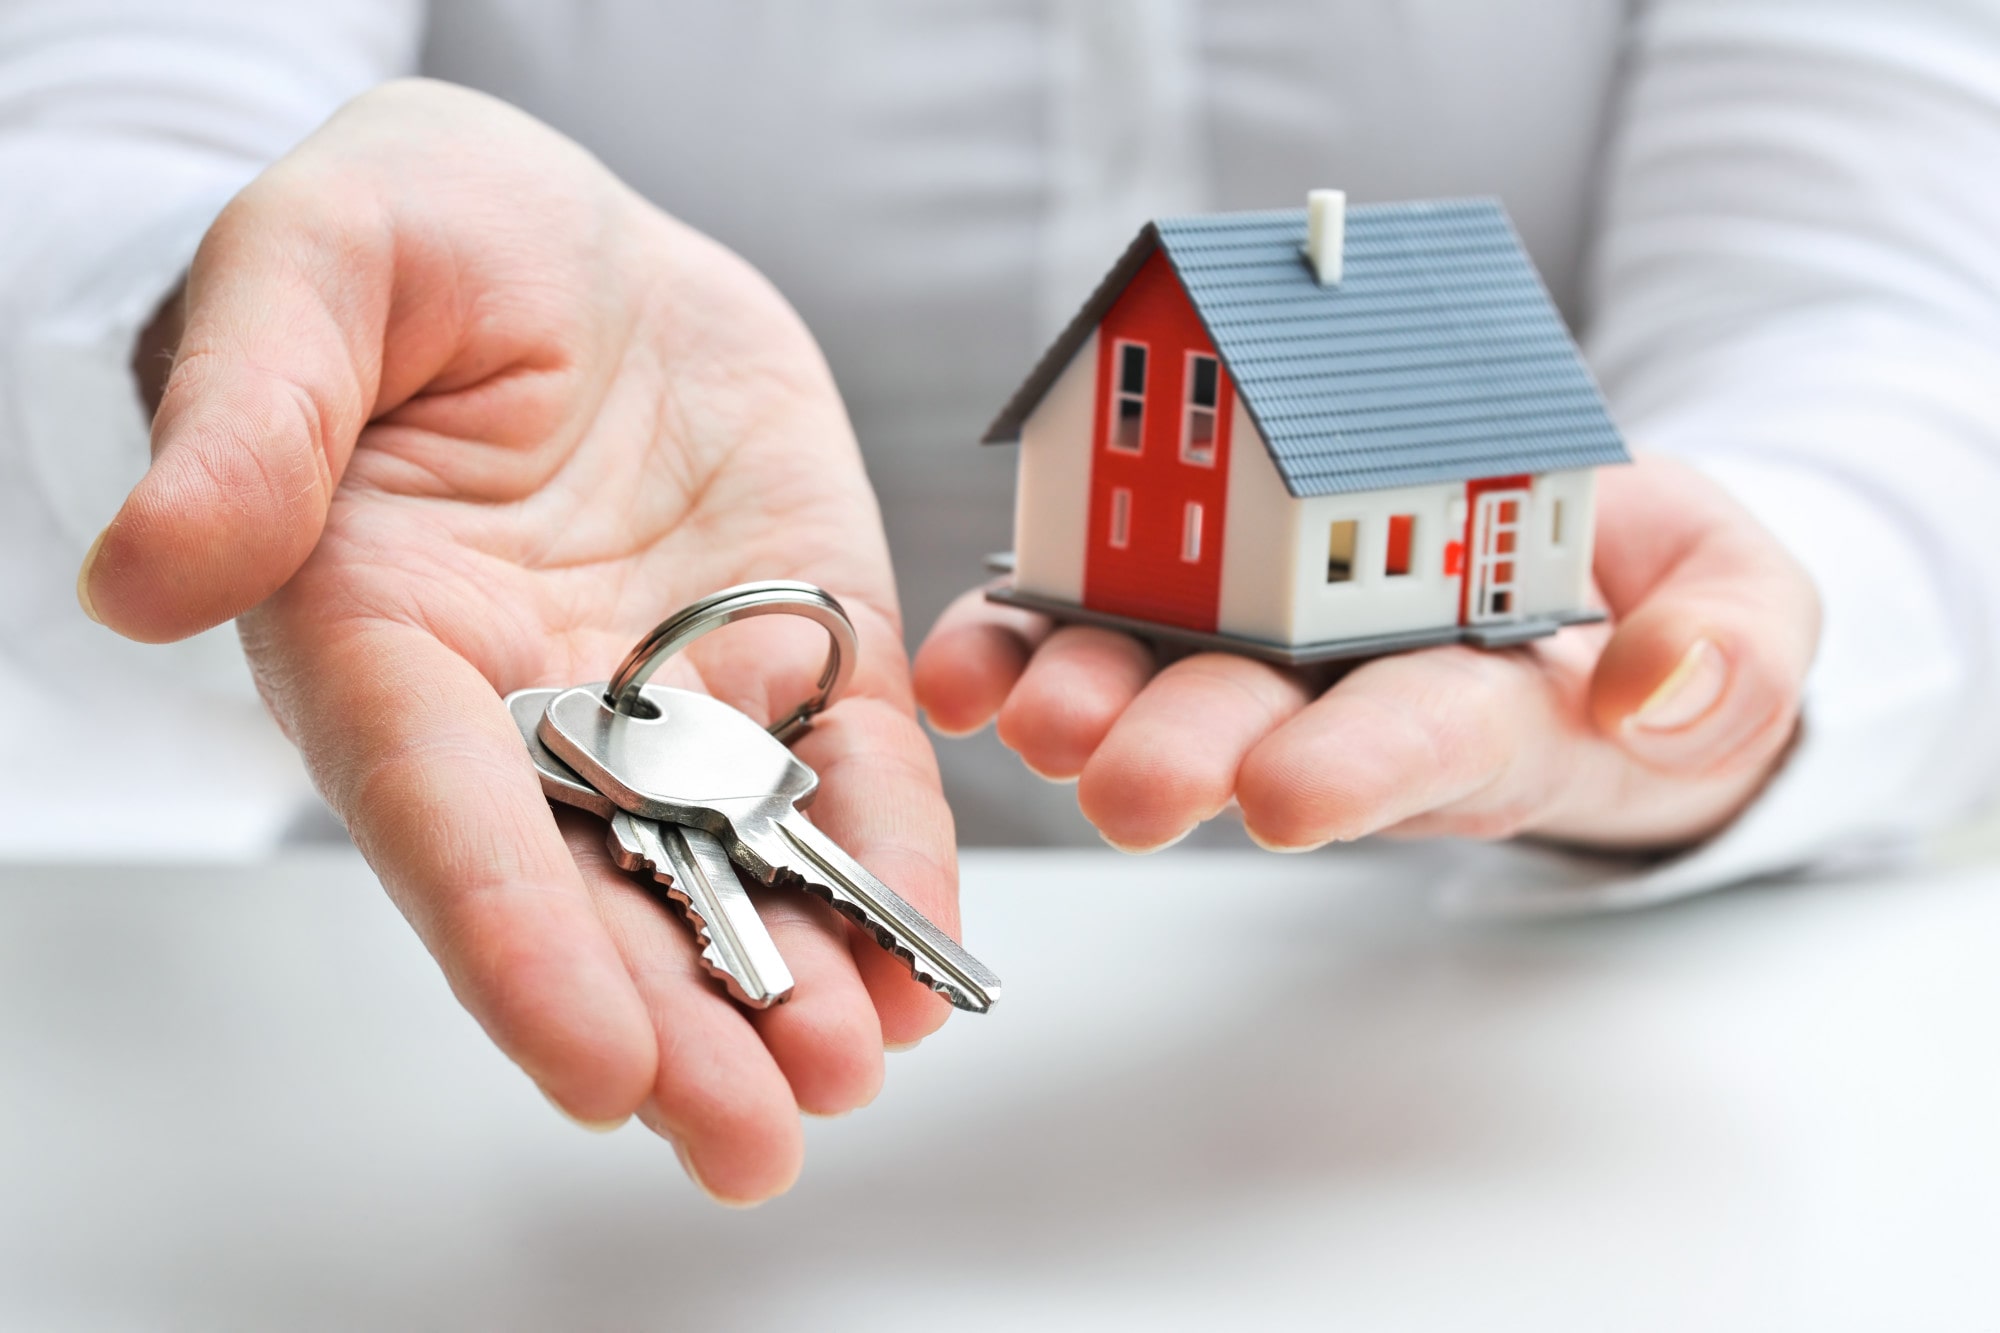 Rental Management or Tenant Placement: Which Is Better?